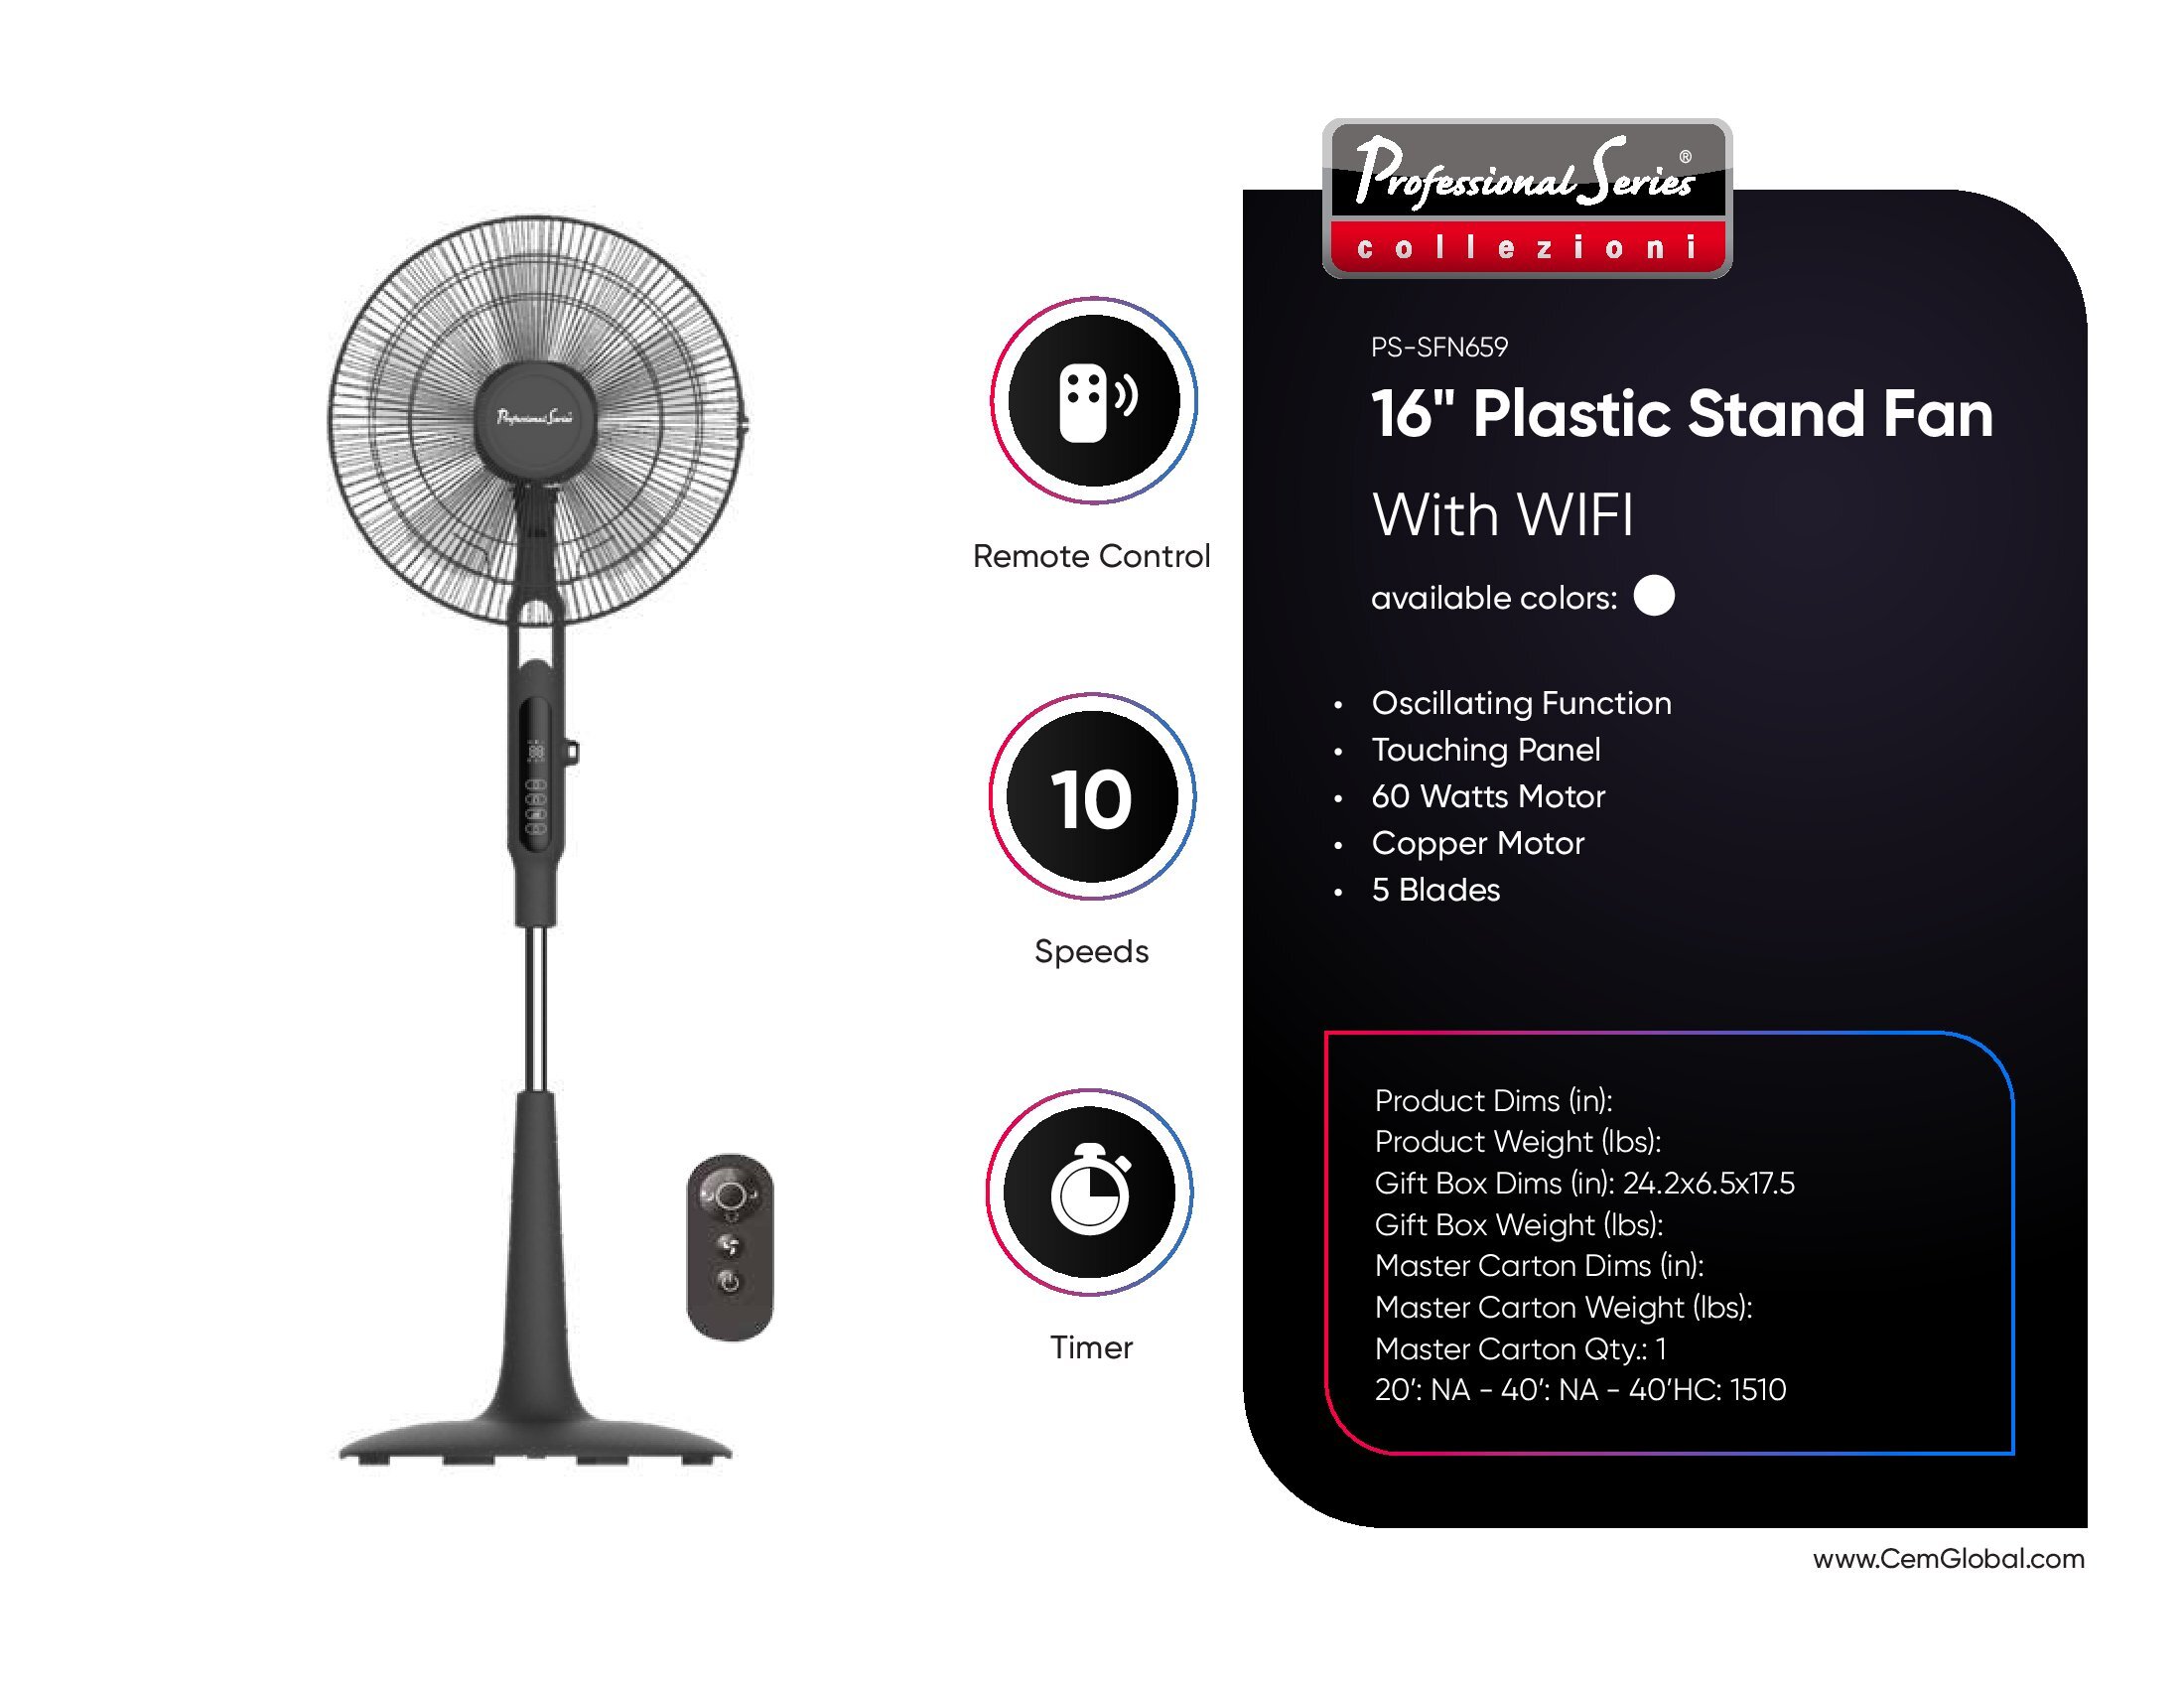 16" Plastic Stand Fan With WIFI